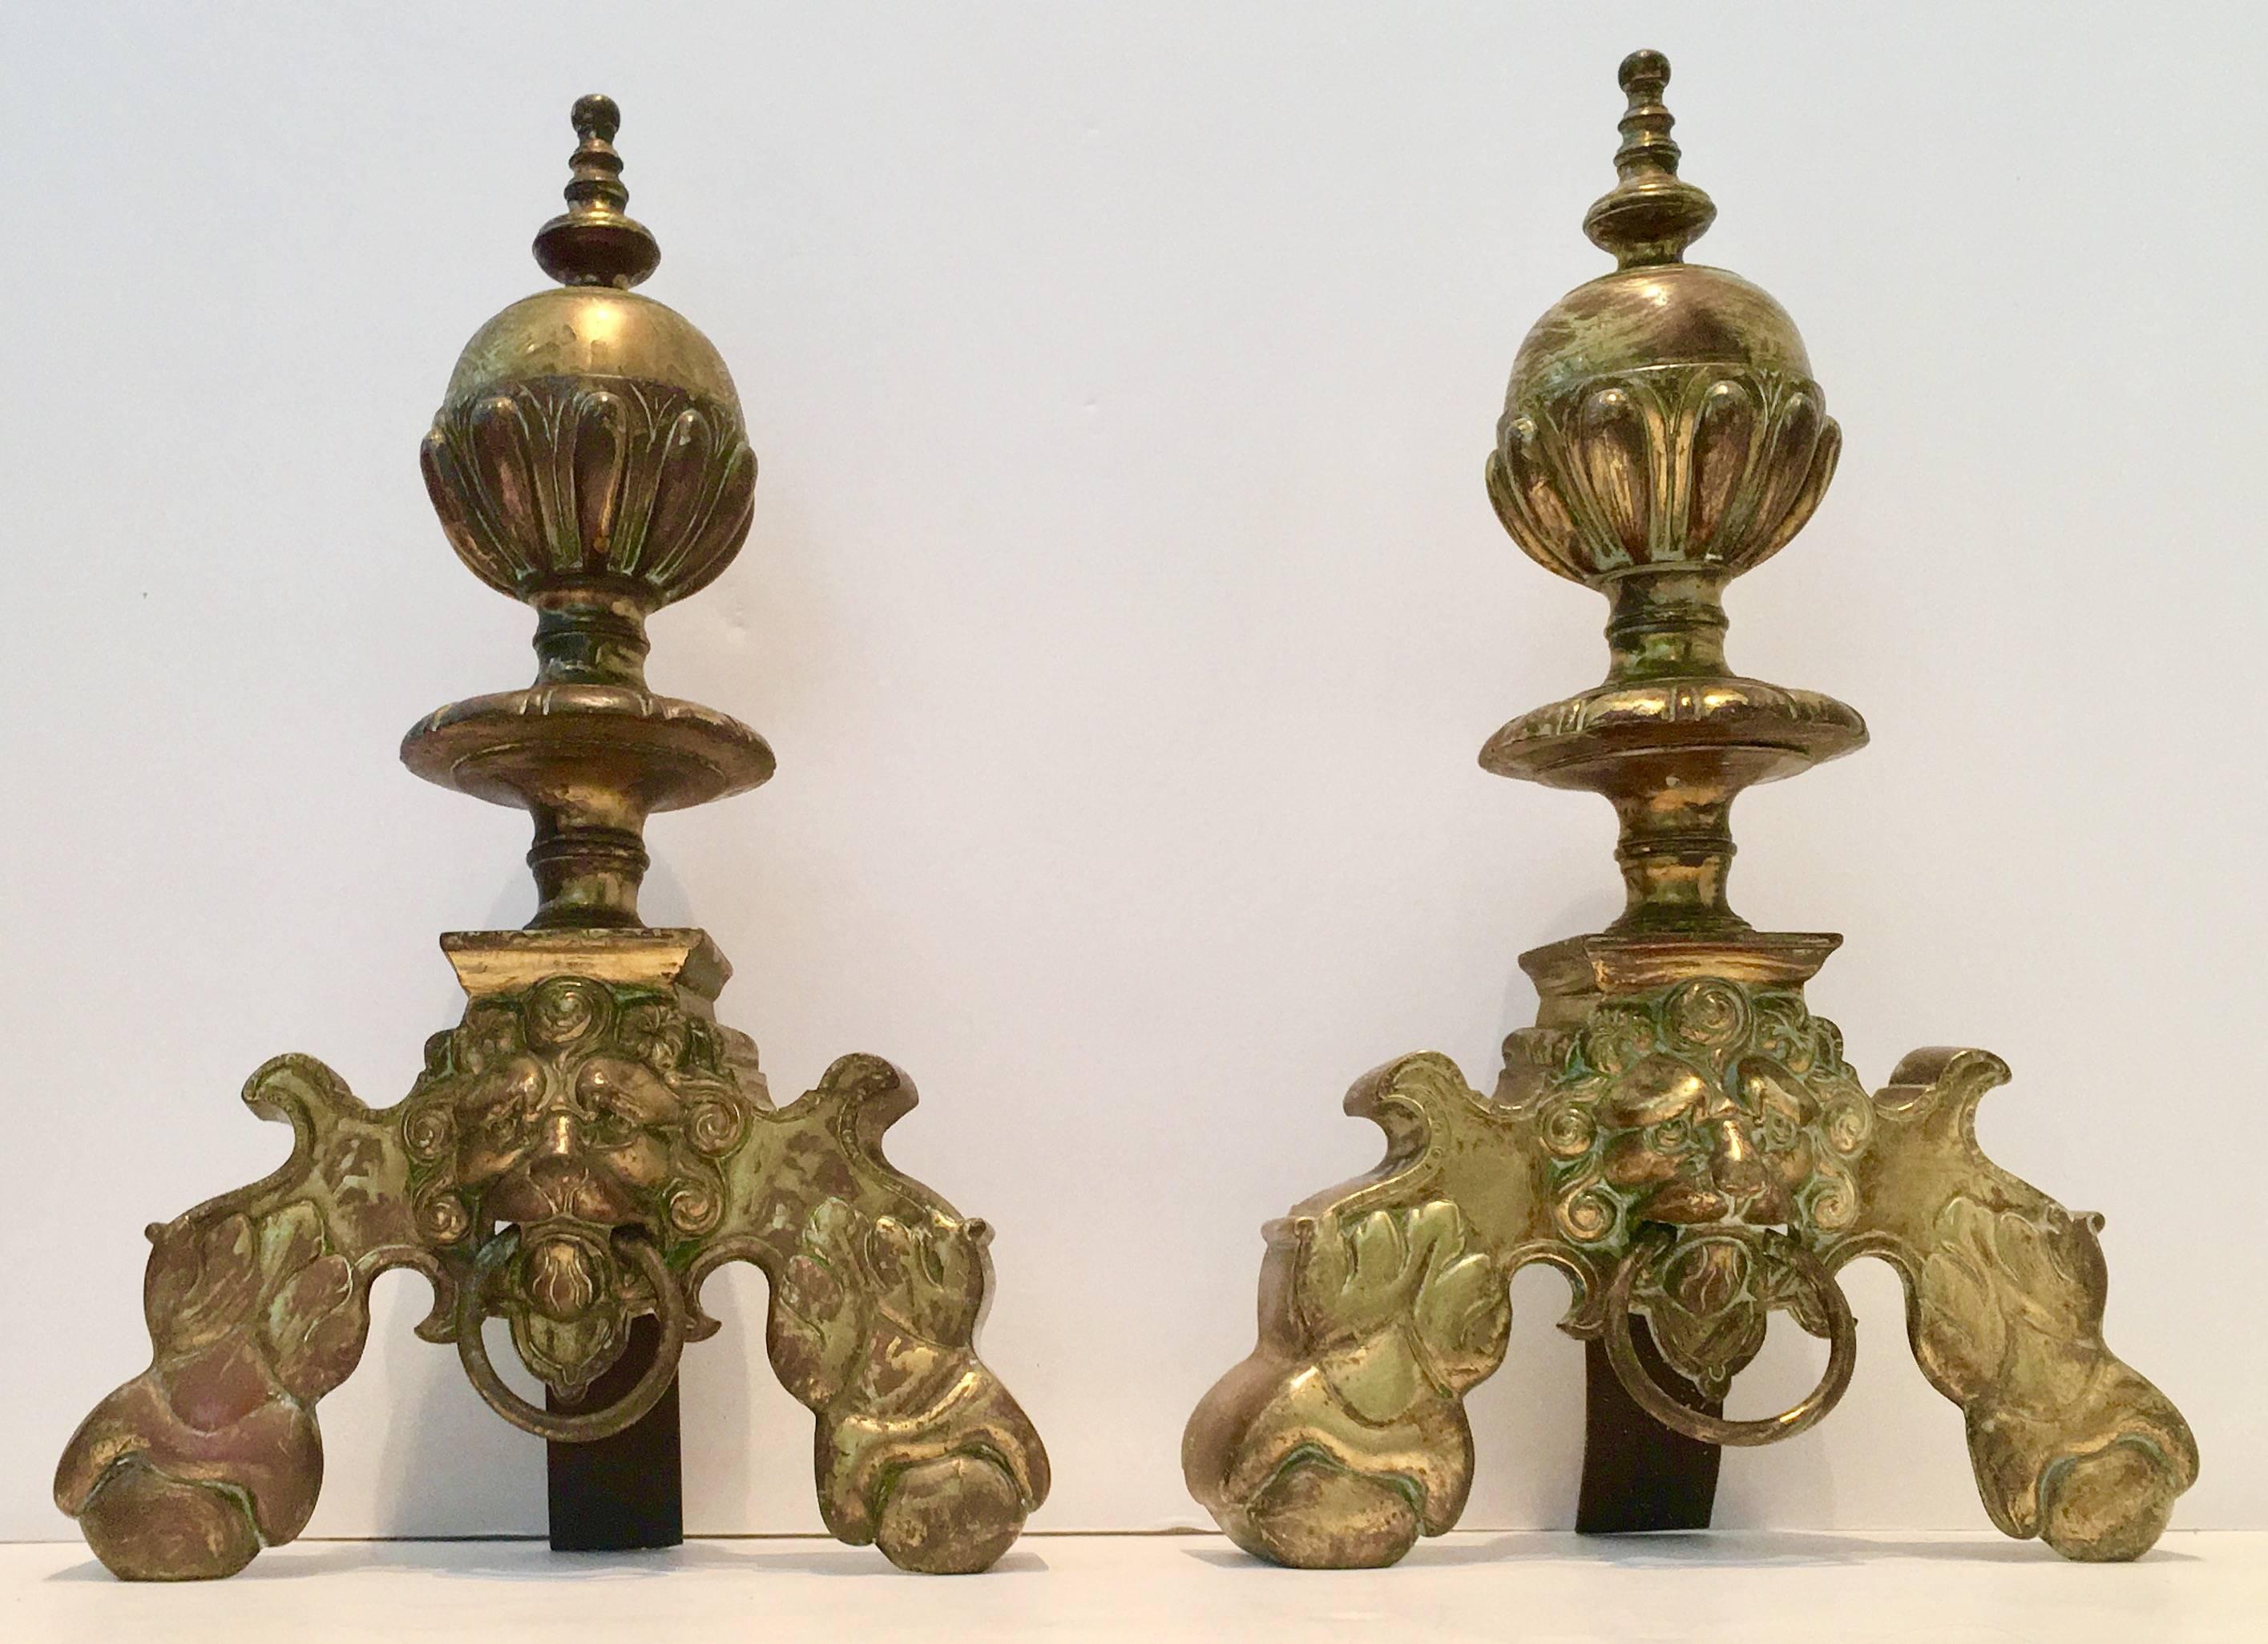 Great pair of lion and ball door knocker solid brass andirons. This pair of very rare chenet/andirons have a faux verdigris wash applied to them. Door knocker ring is adjustable.